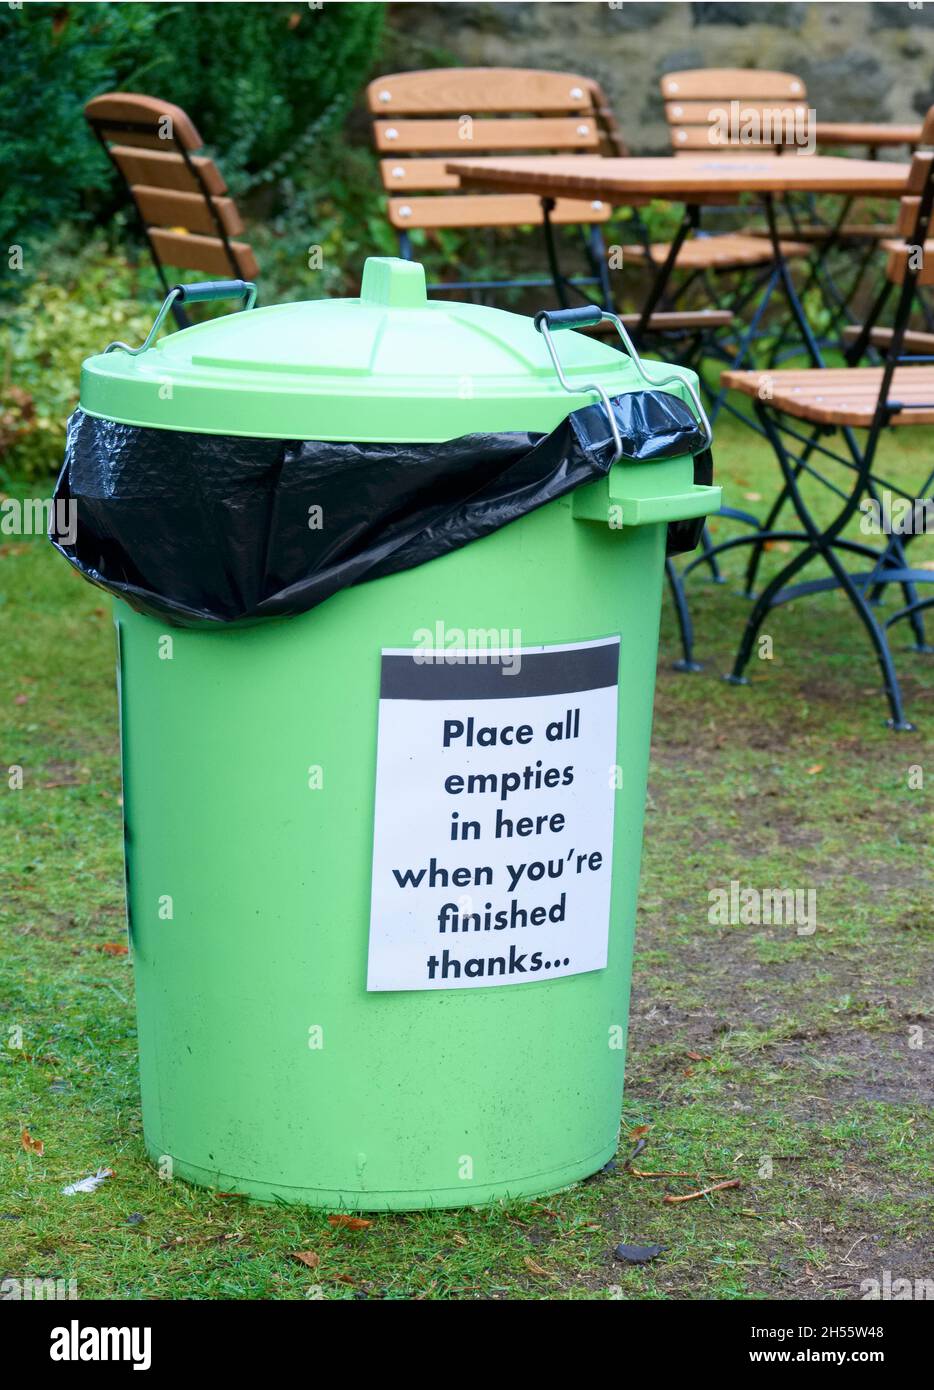 Green bin at outdoor cafe for garbage collection to keep area clean Stock Photo